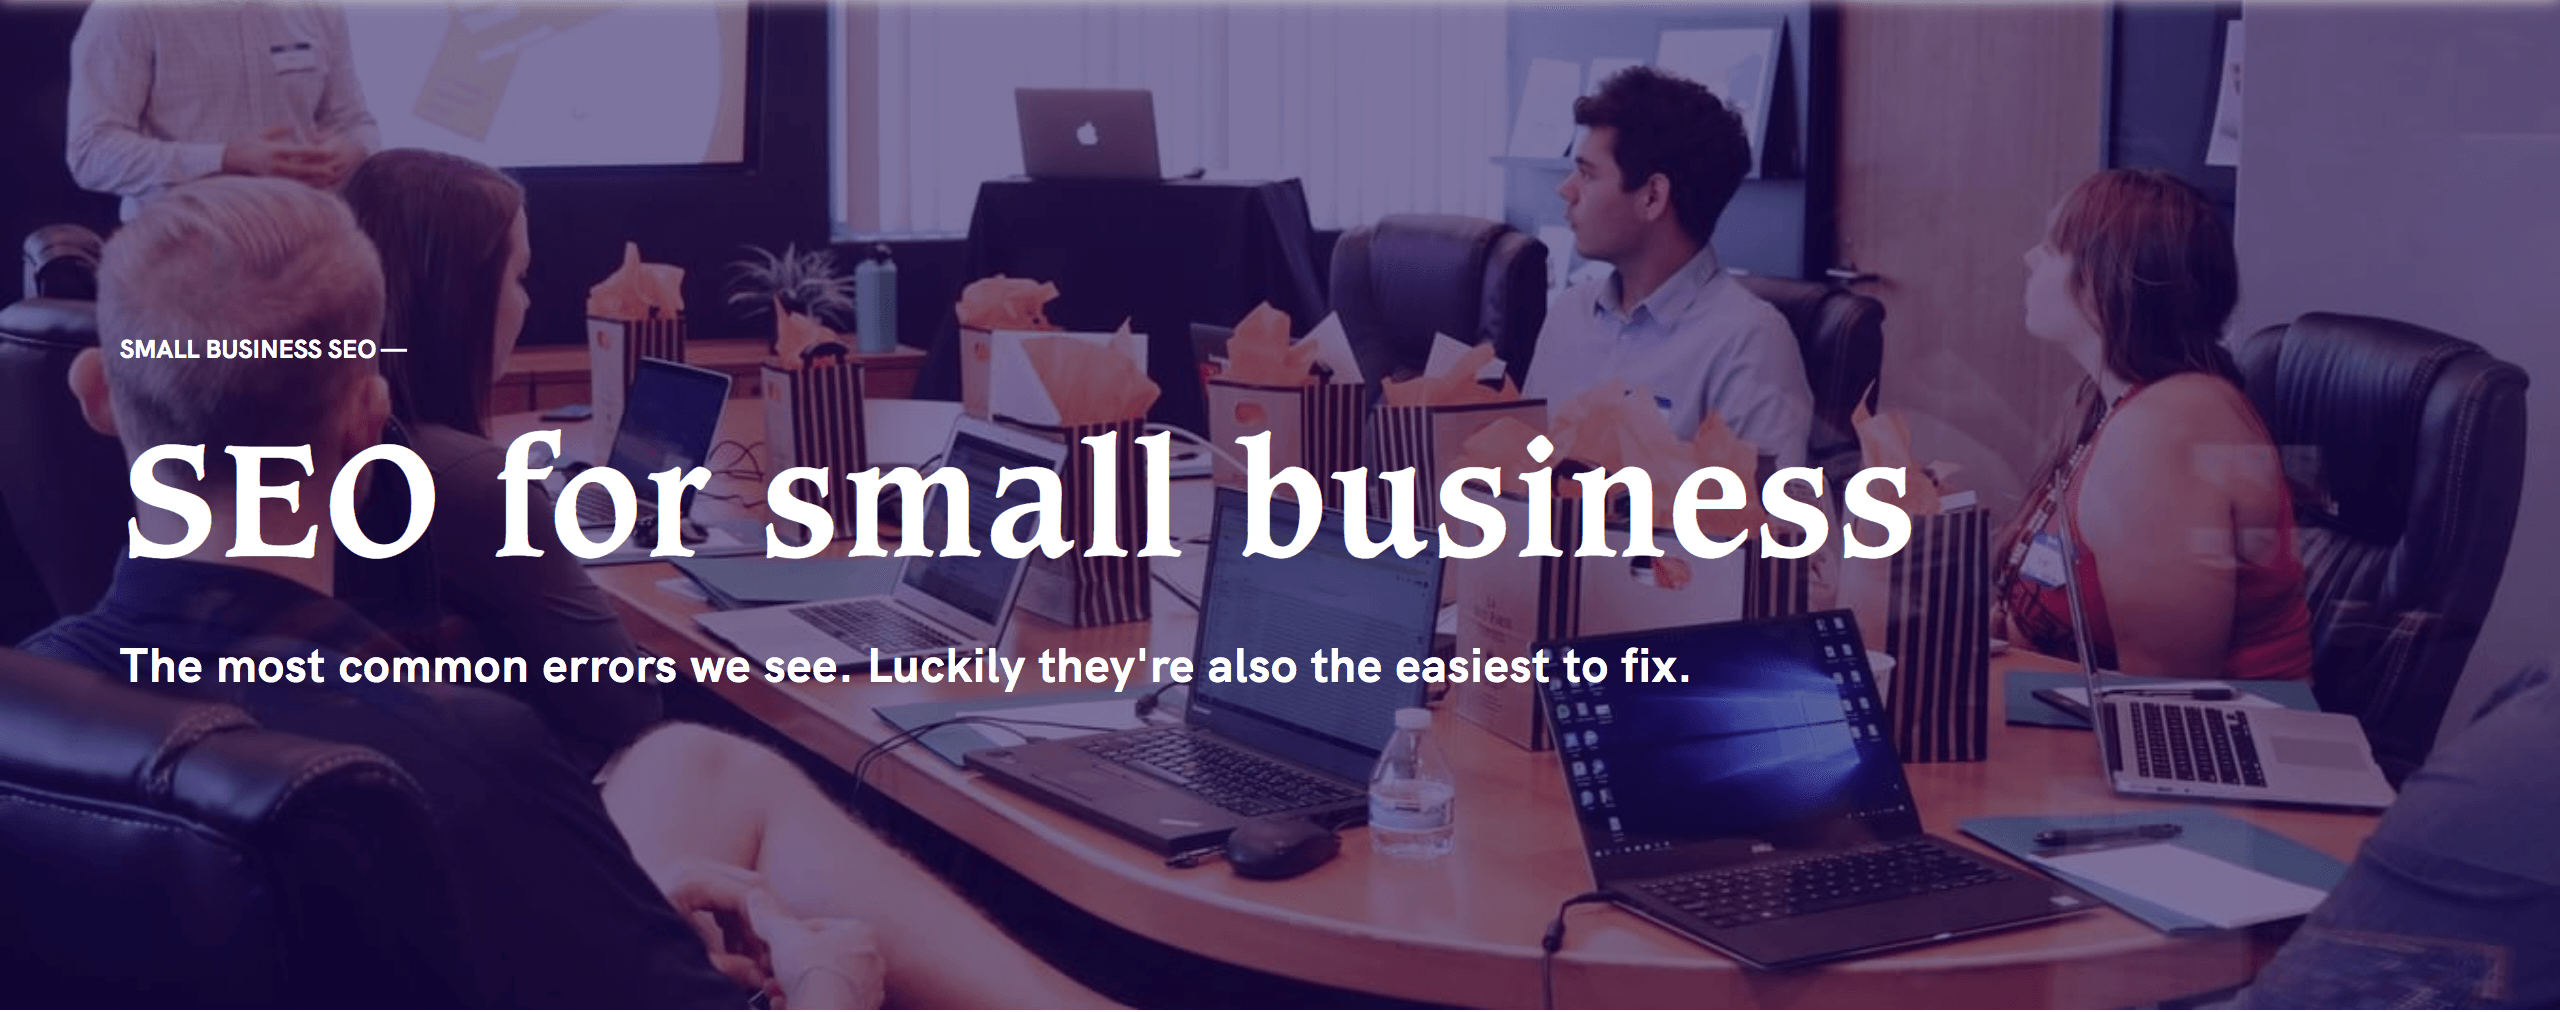 seo for small business header image